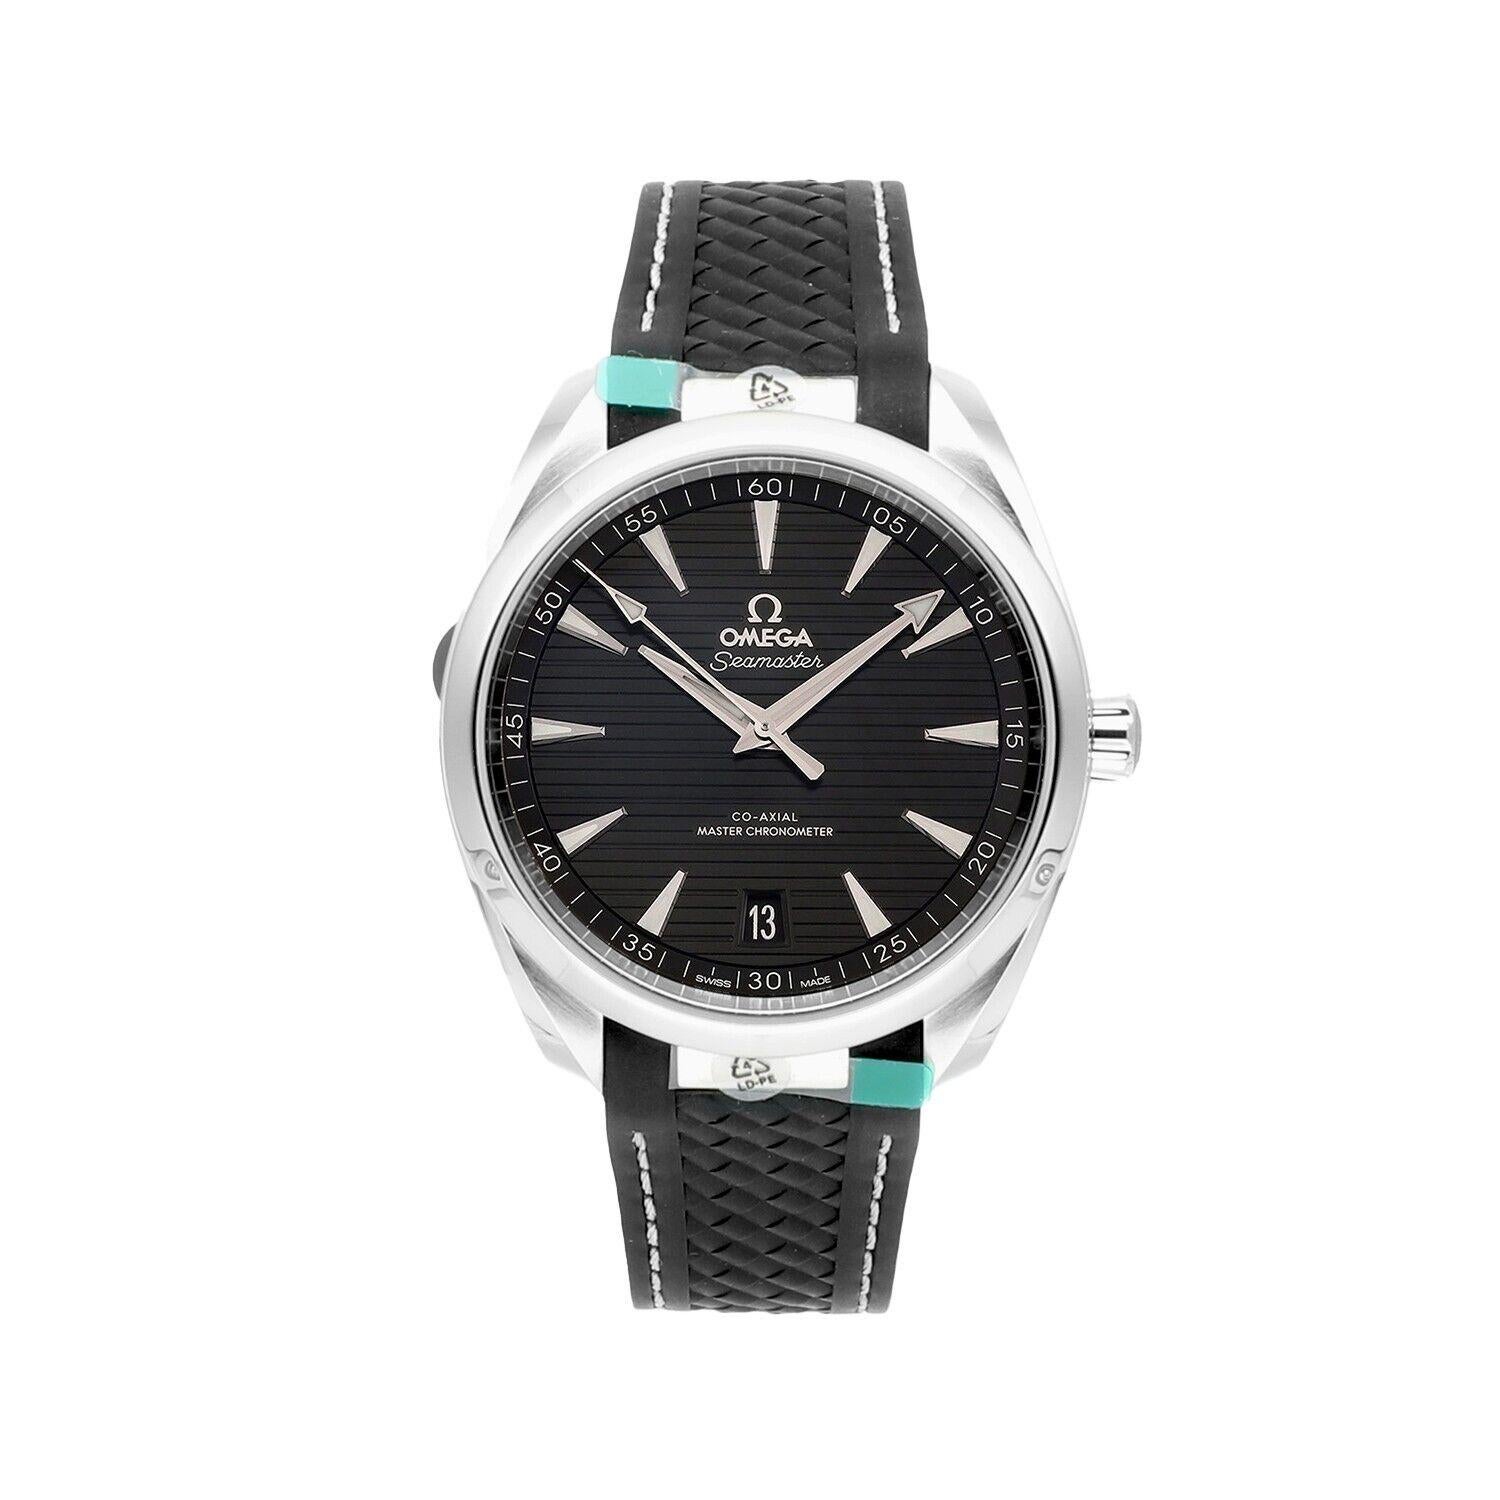 The Seamaster Aqua Terra is a superb tribute to OMEGA’s rich maritime heritage. In this 41mm model, the symmetrical case has been crafted from stainless steel, with a wave-edged design featured on the back.
The black dial is distinguished by a